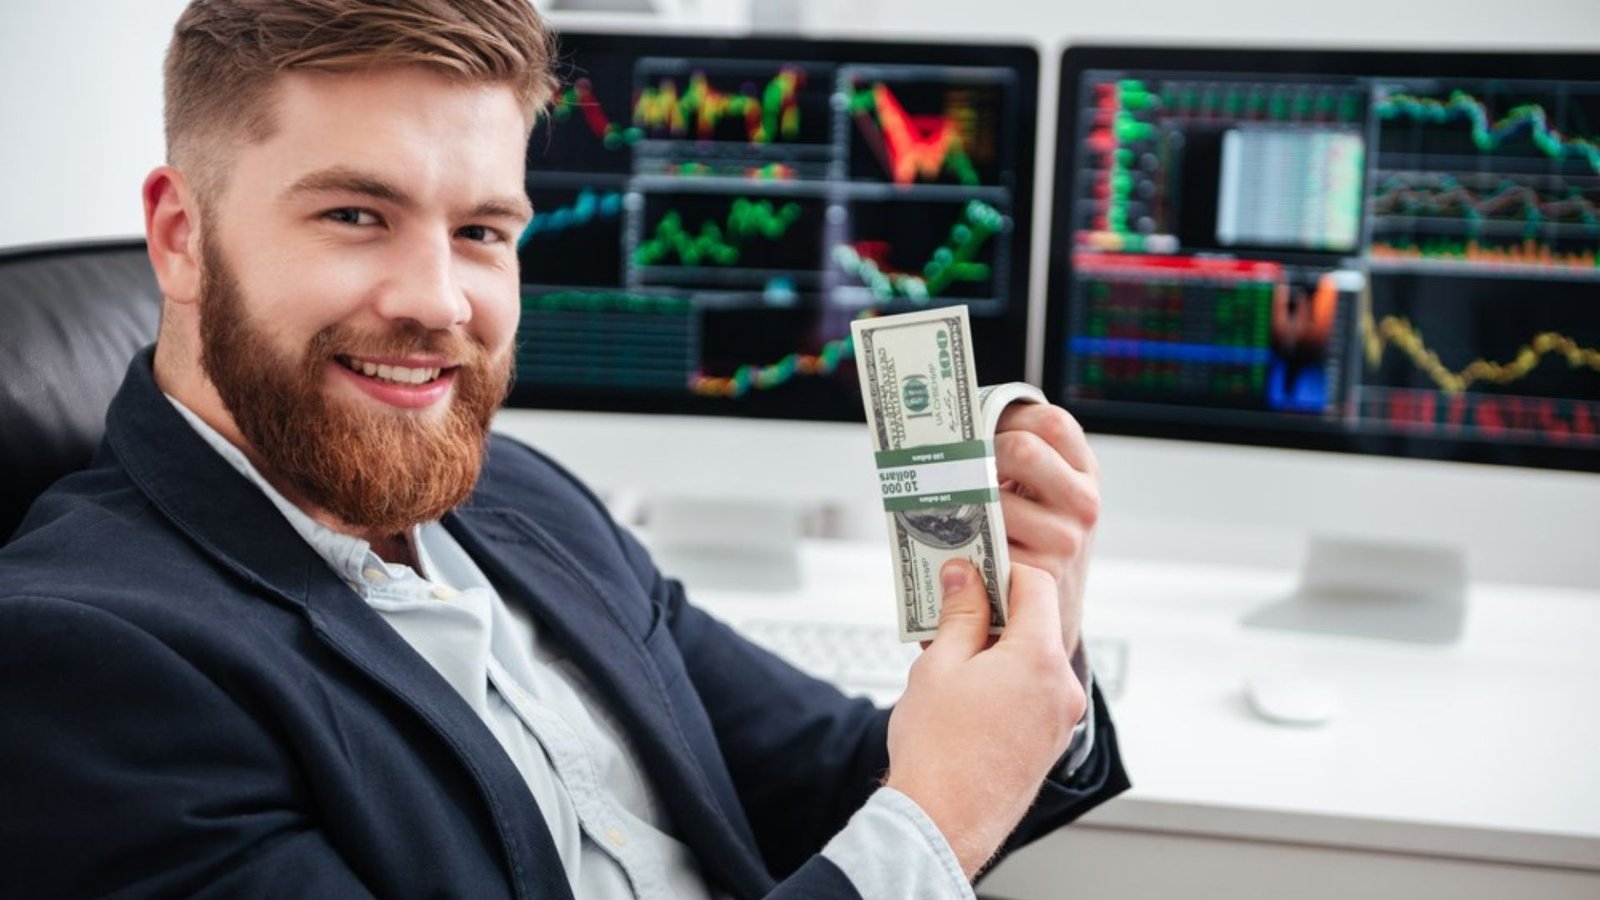 a man smiling while holding money with the background of forex trading showing wealth in the forex market